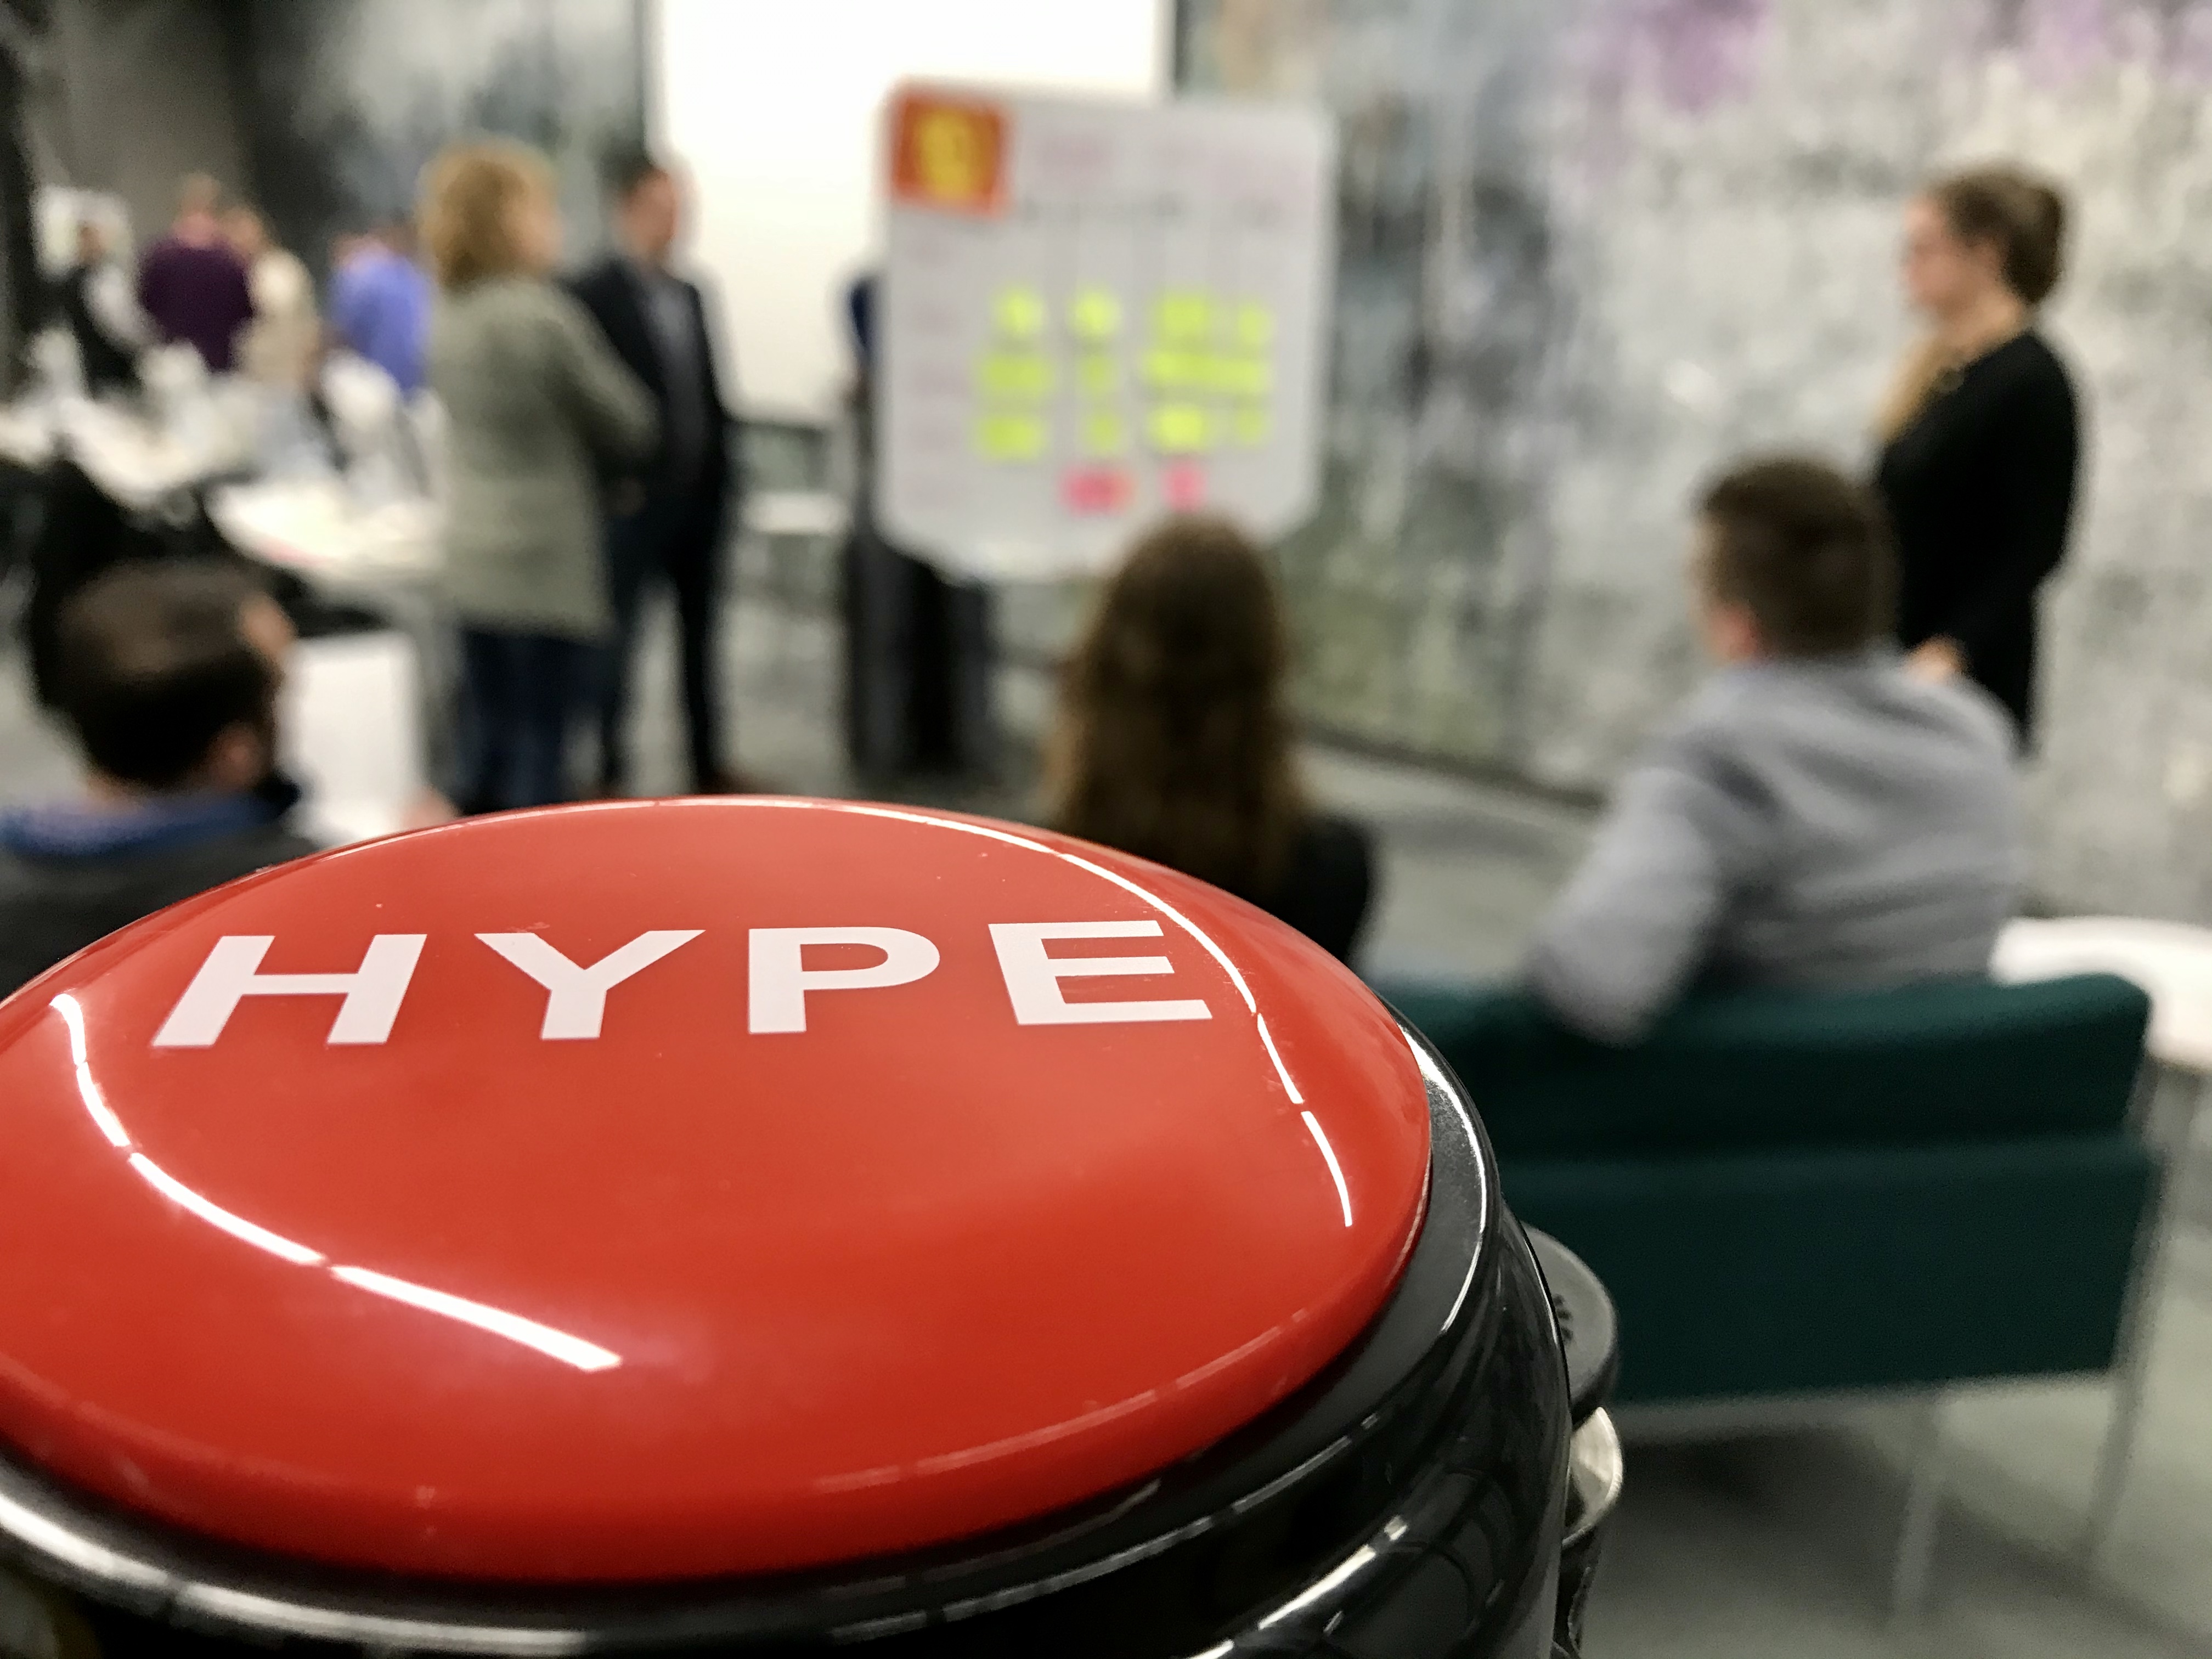 The SPARK HYPE button is shown in a team meeting.